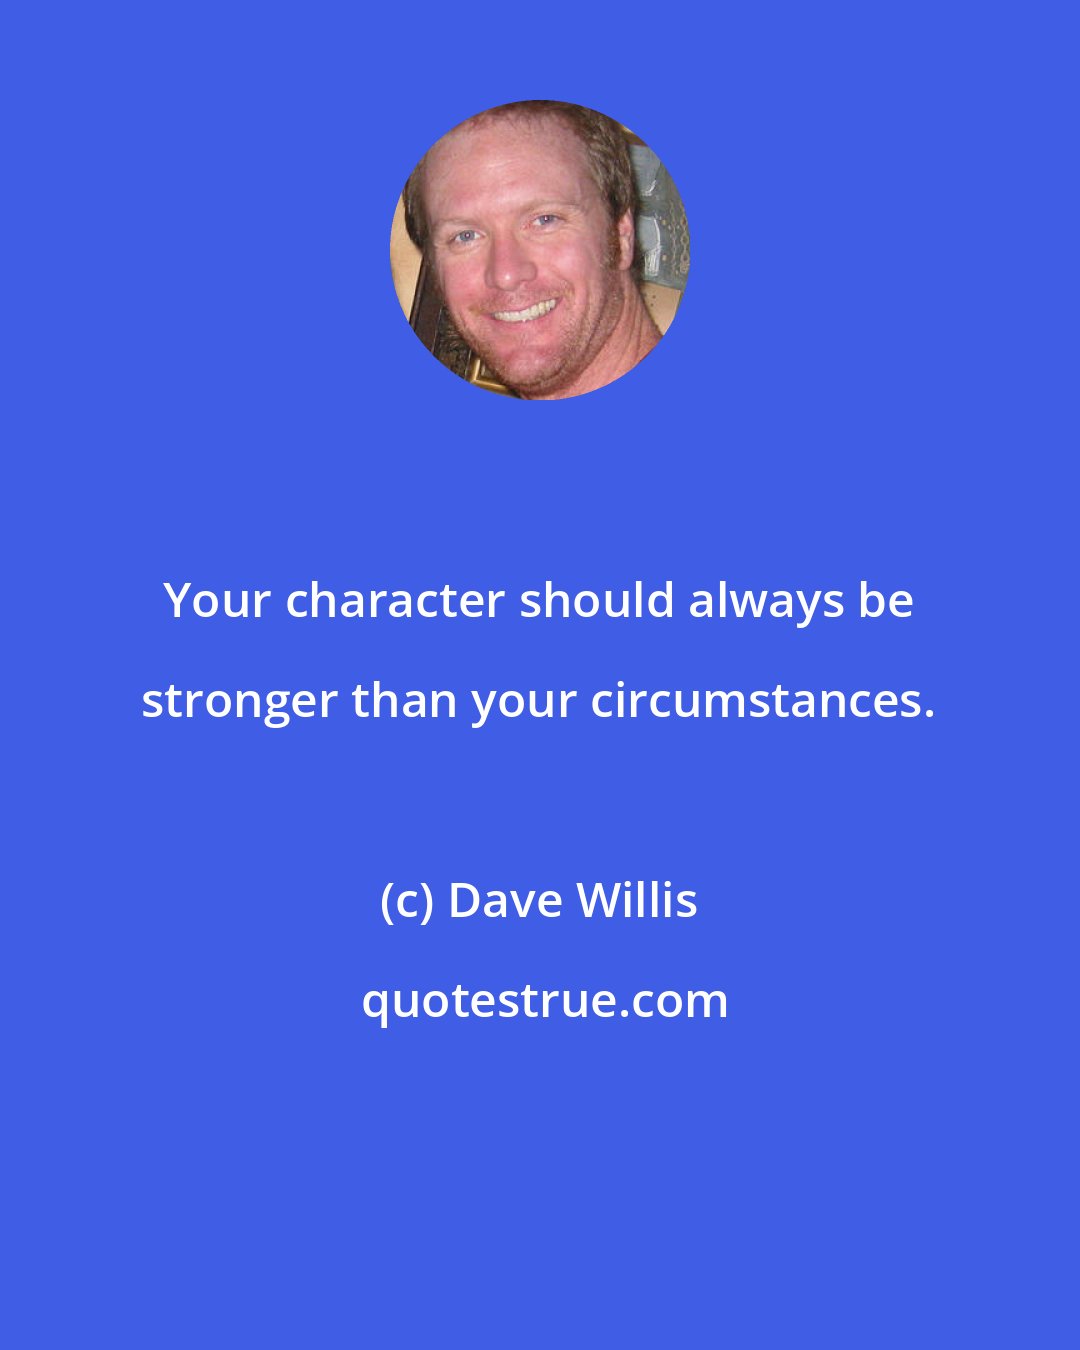 Dave Willis: Your character should always be stronger than your circumstances.